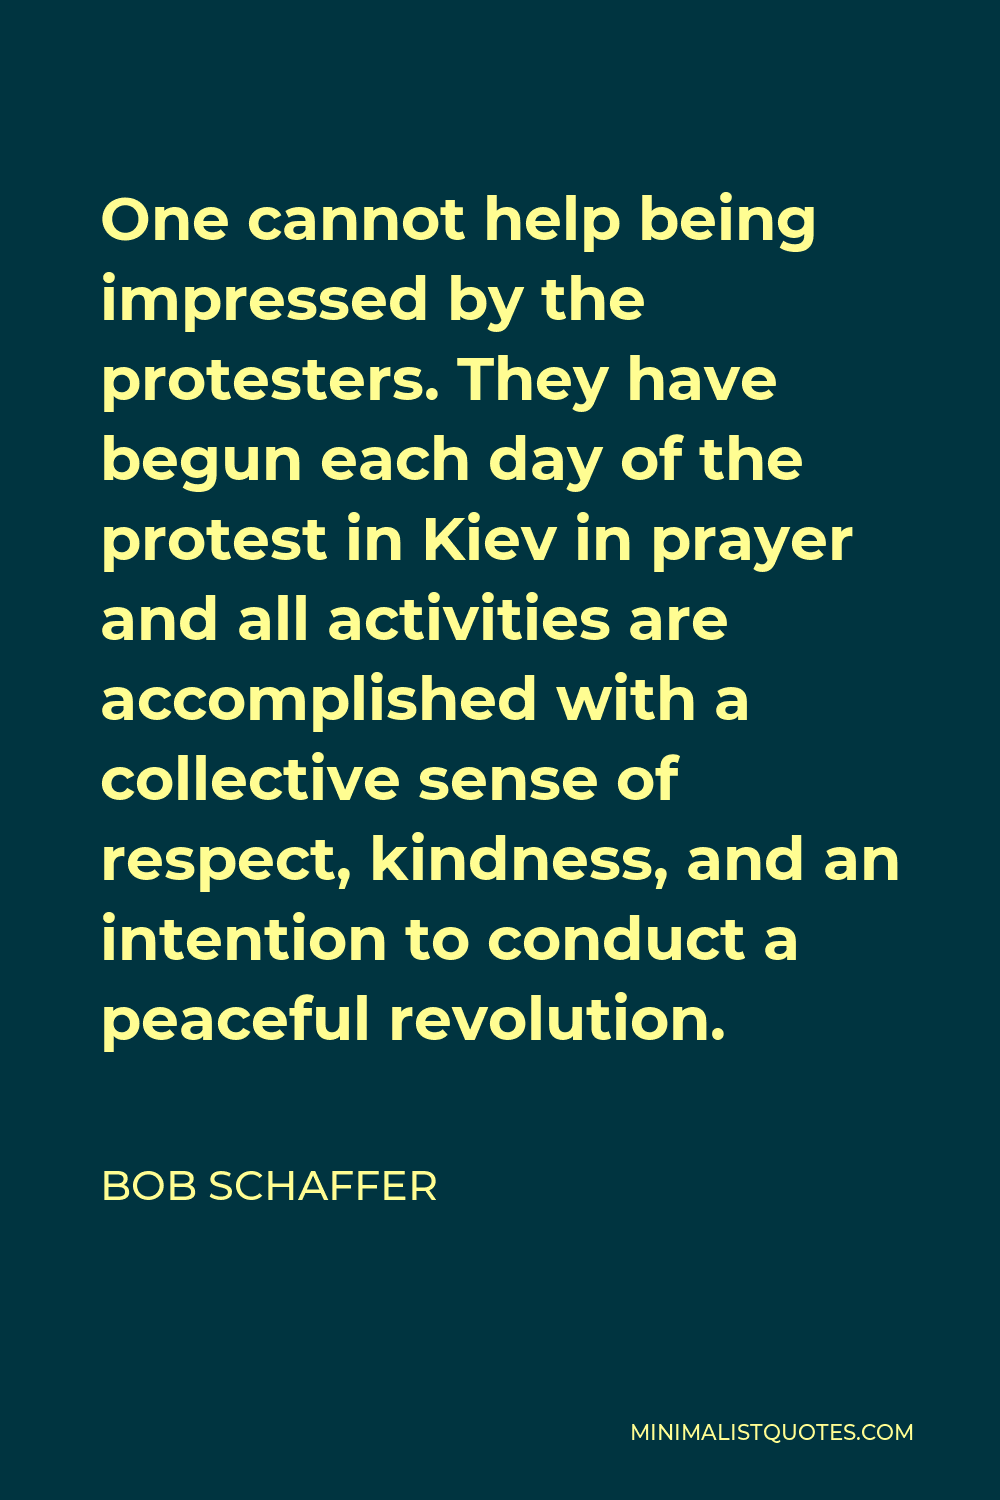 Bob Schaffer Quote - One cannot help being impressed by the protesters. They have begun each day of the protest in Kiev in prayer and all activities are accomplished with a collective sense of respect, kindness, and an intention to conduct a peaceful revolution.